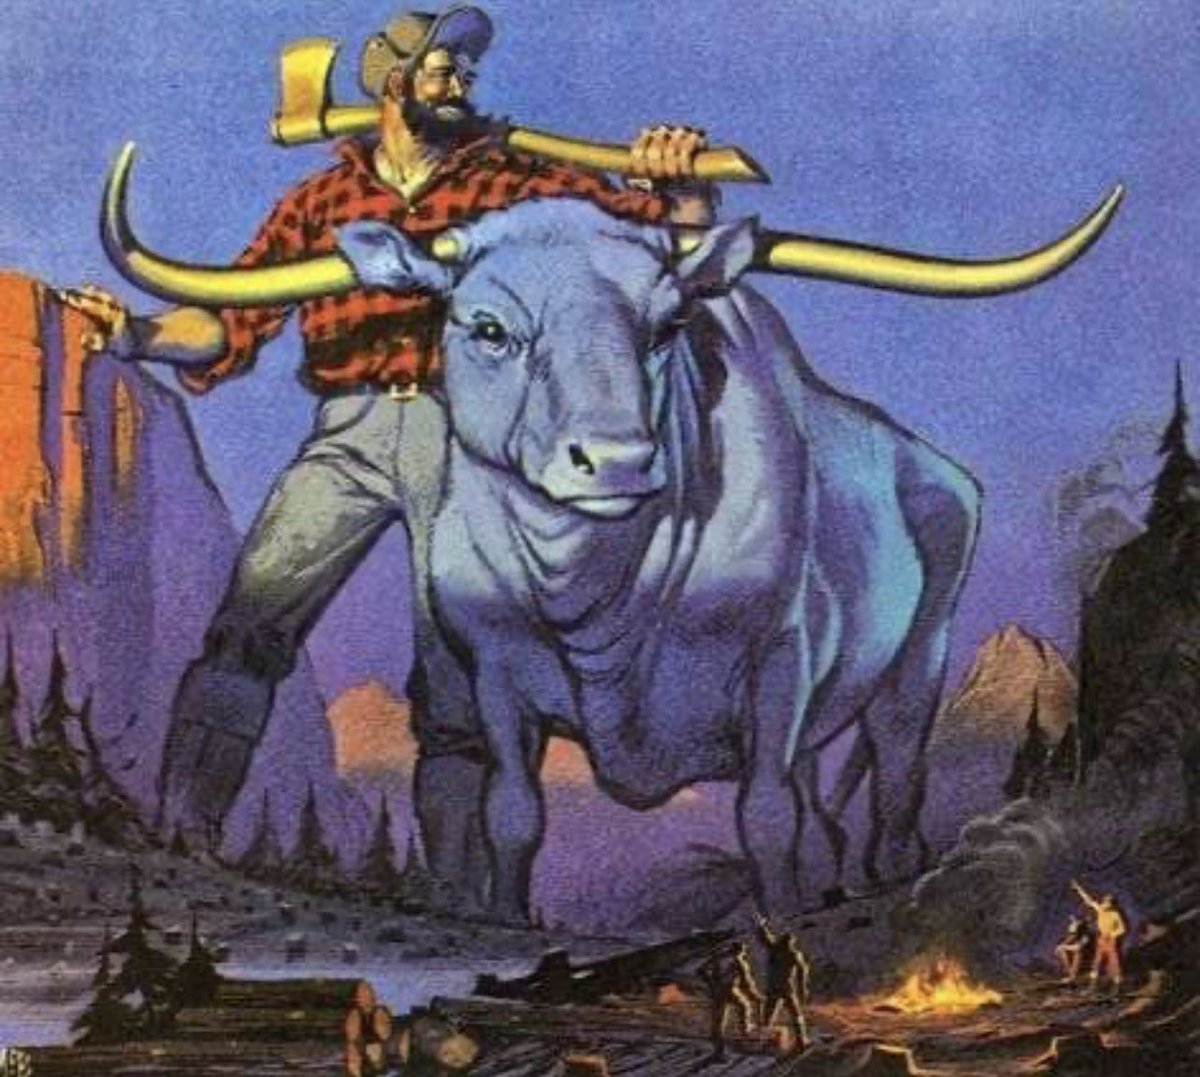 Not only is Paul Bunyan America's first Kaiju, but he would easily destroy the majority of the other Kaijus. That includes both Godzilla and King Kong.